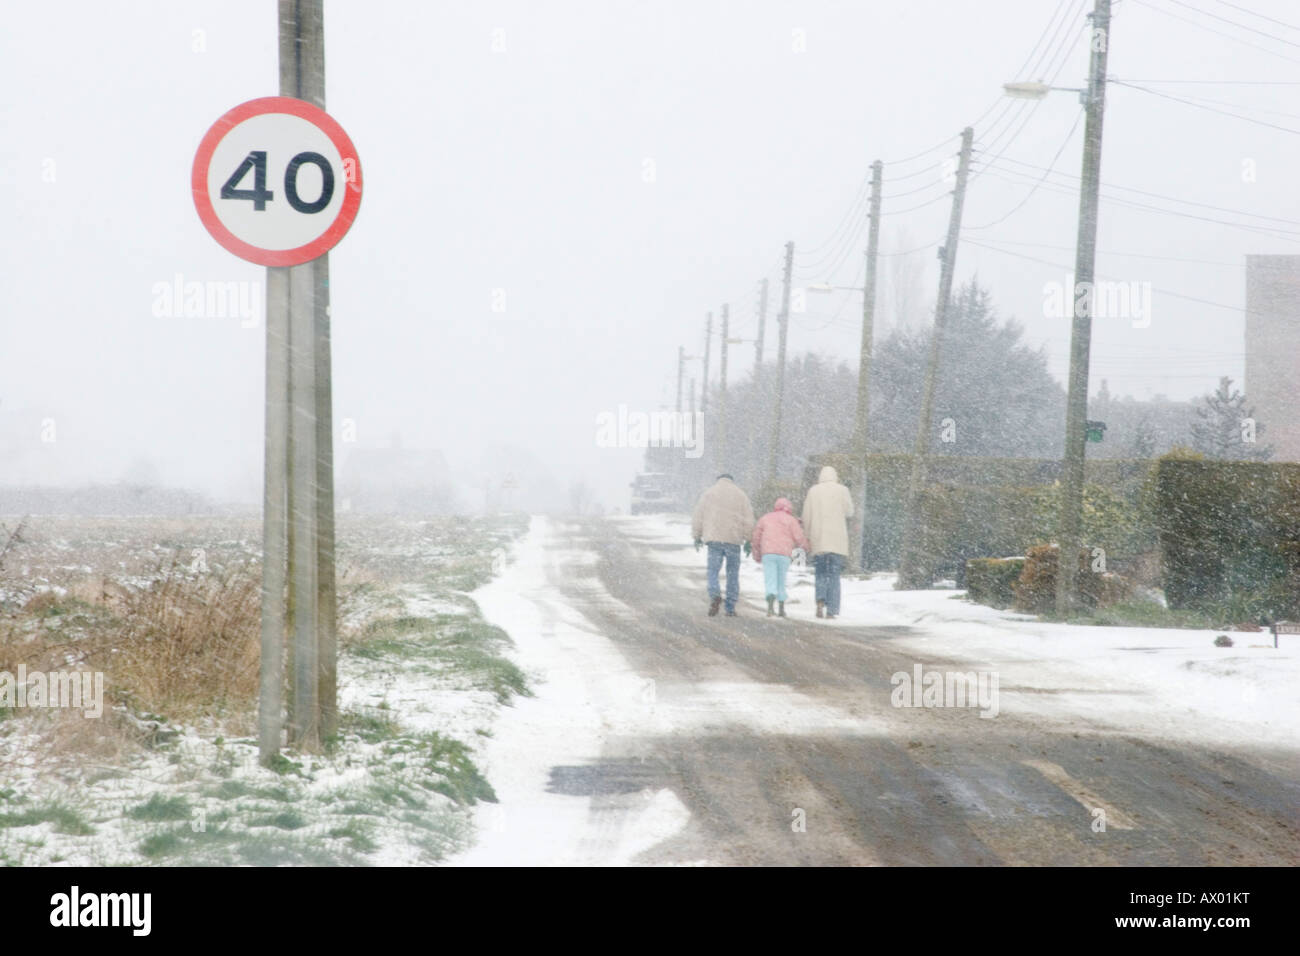 Three people walking down a road in the snow in winter, with a 40 miles per hour sign in the foreground Stock Photo